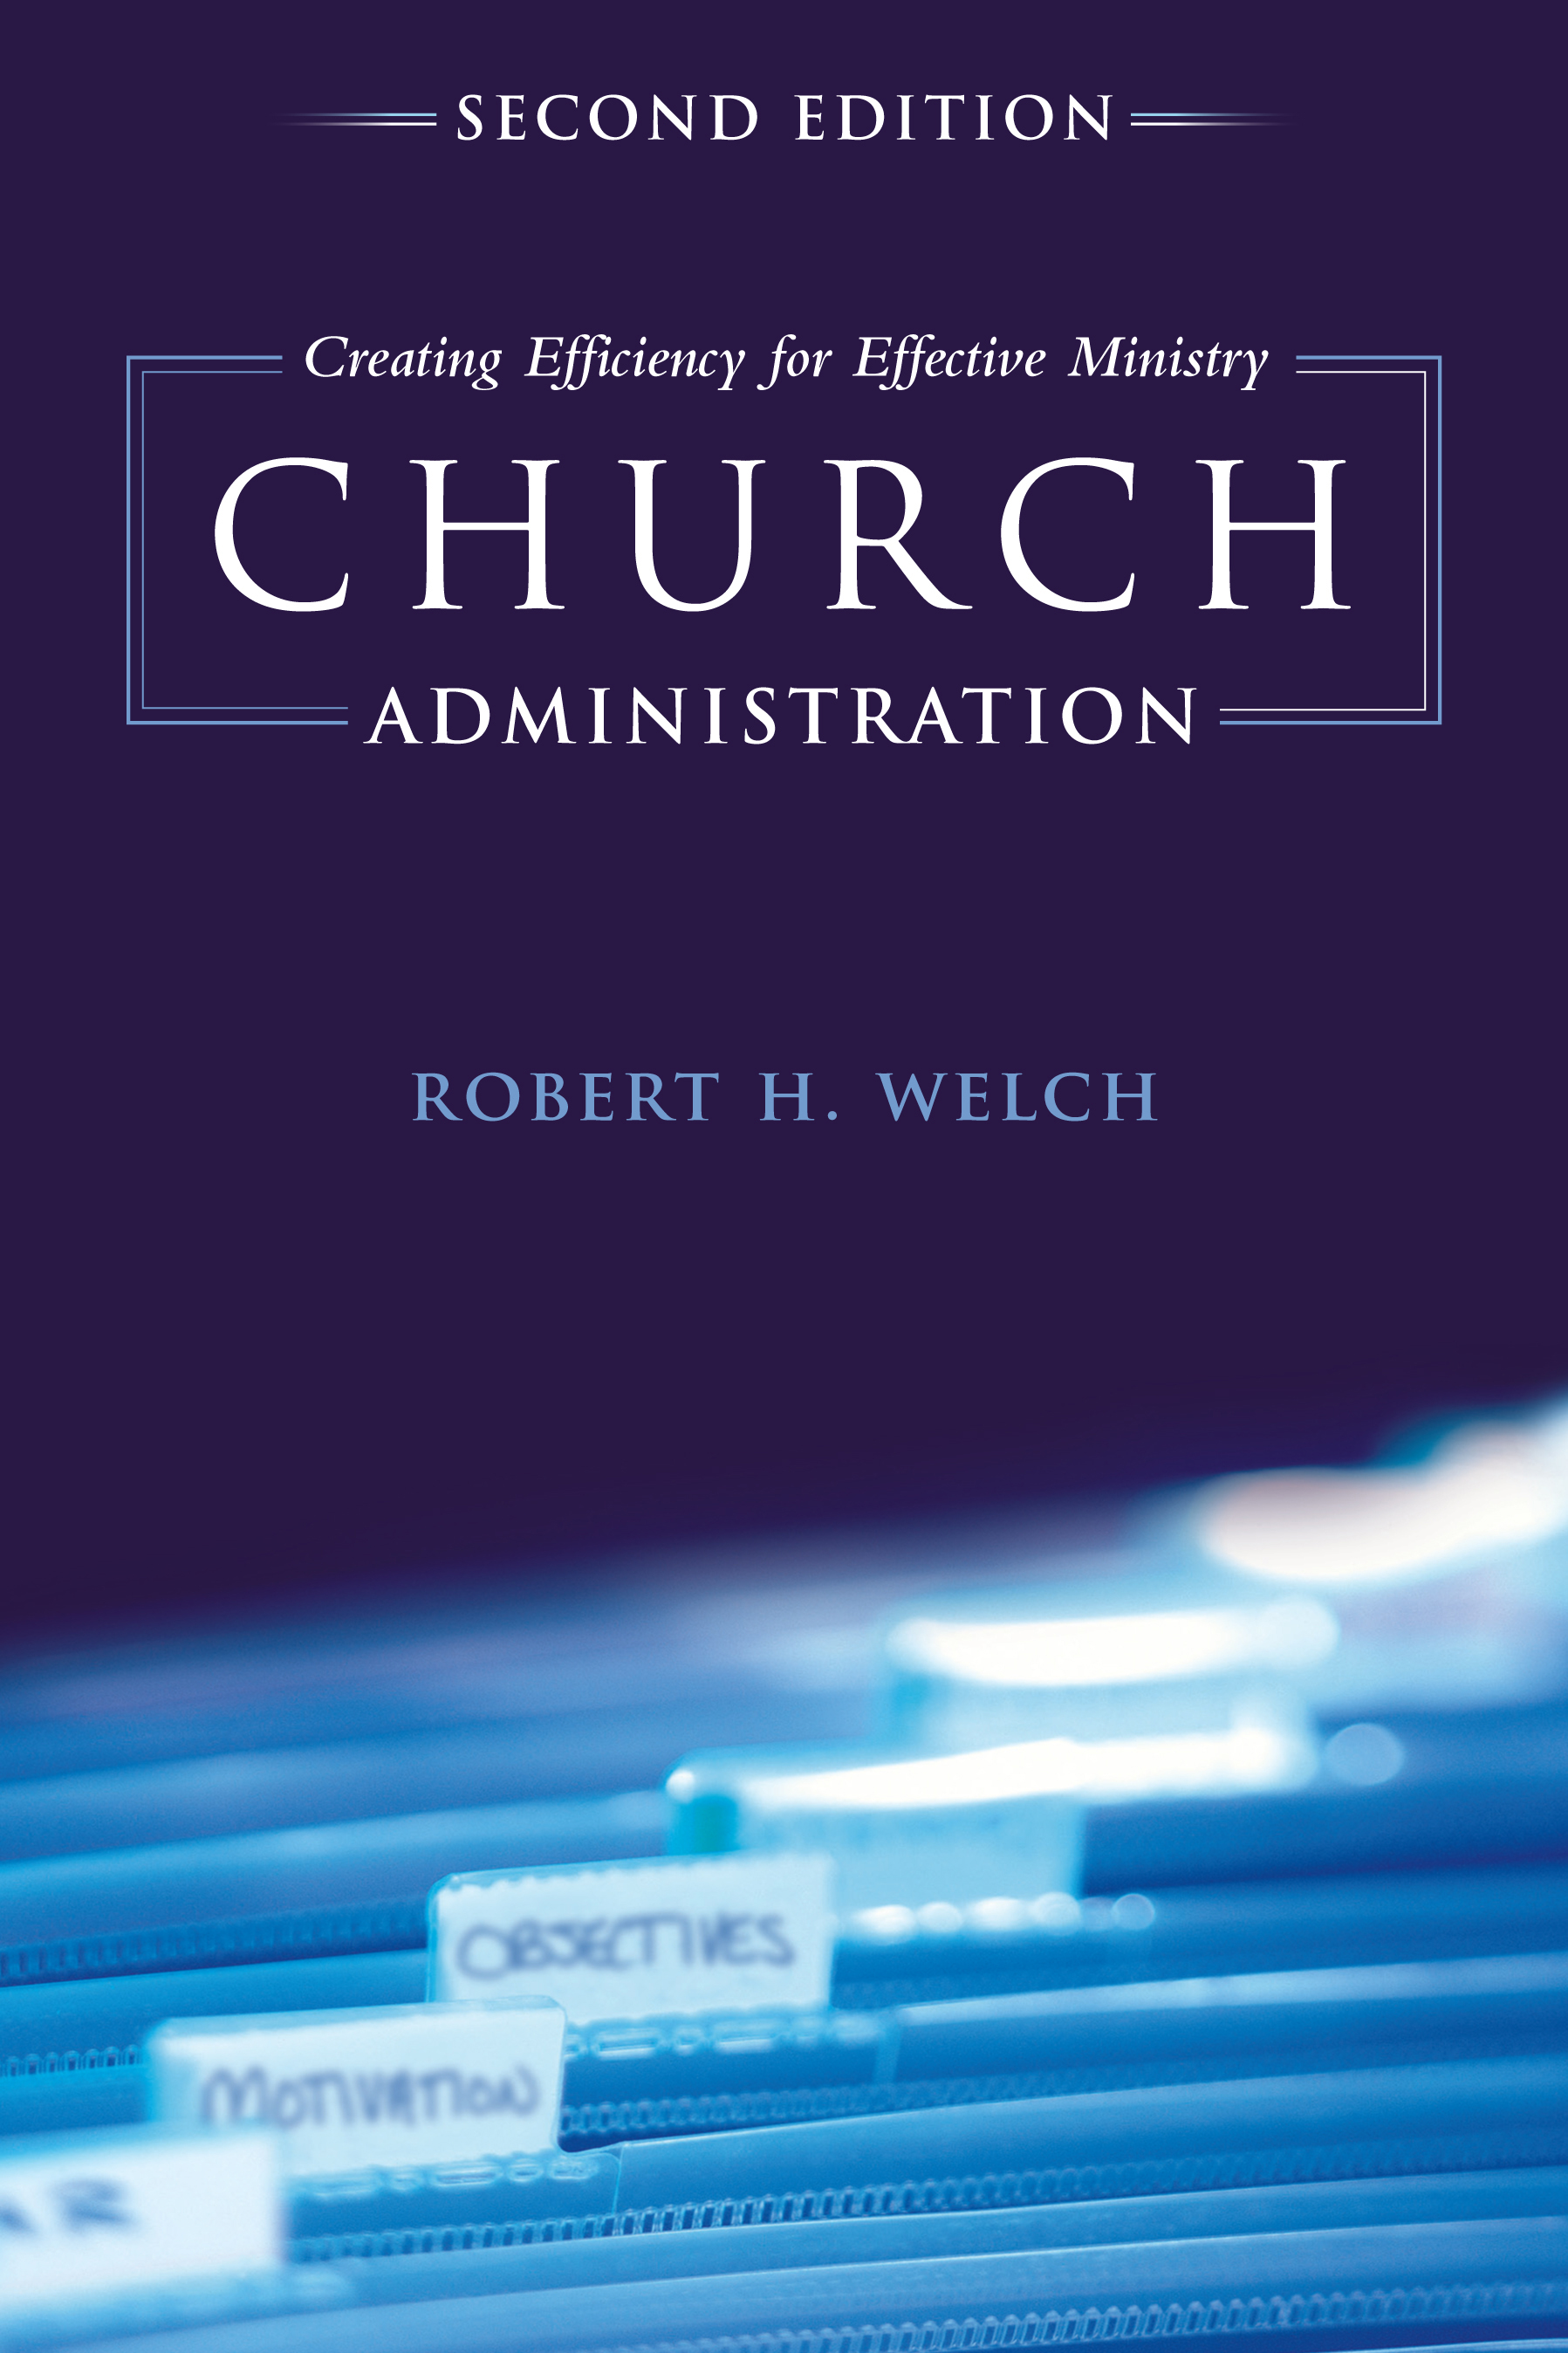 Church Administration by Robert H Welch Free Delivery at Eden